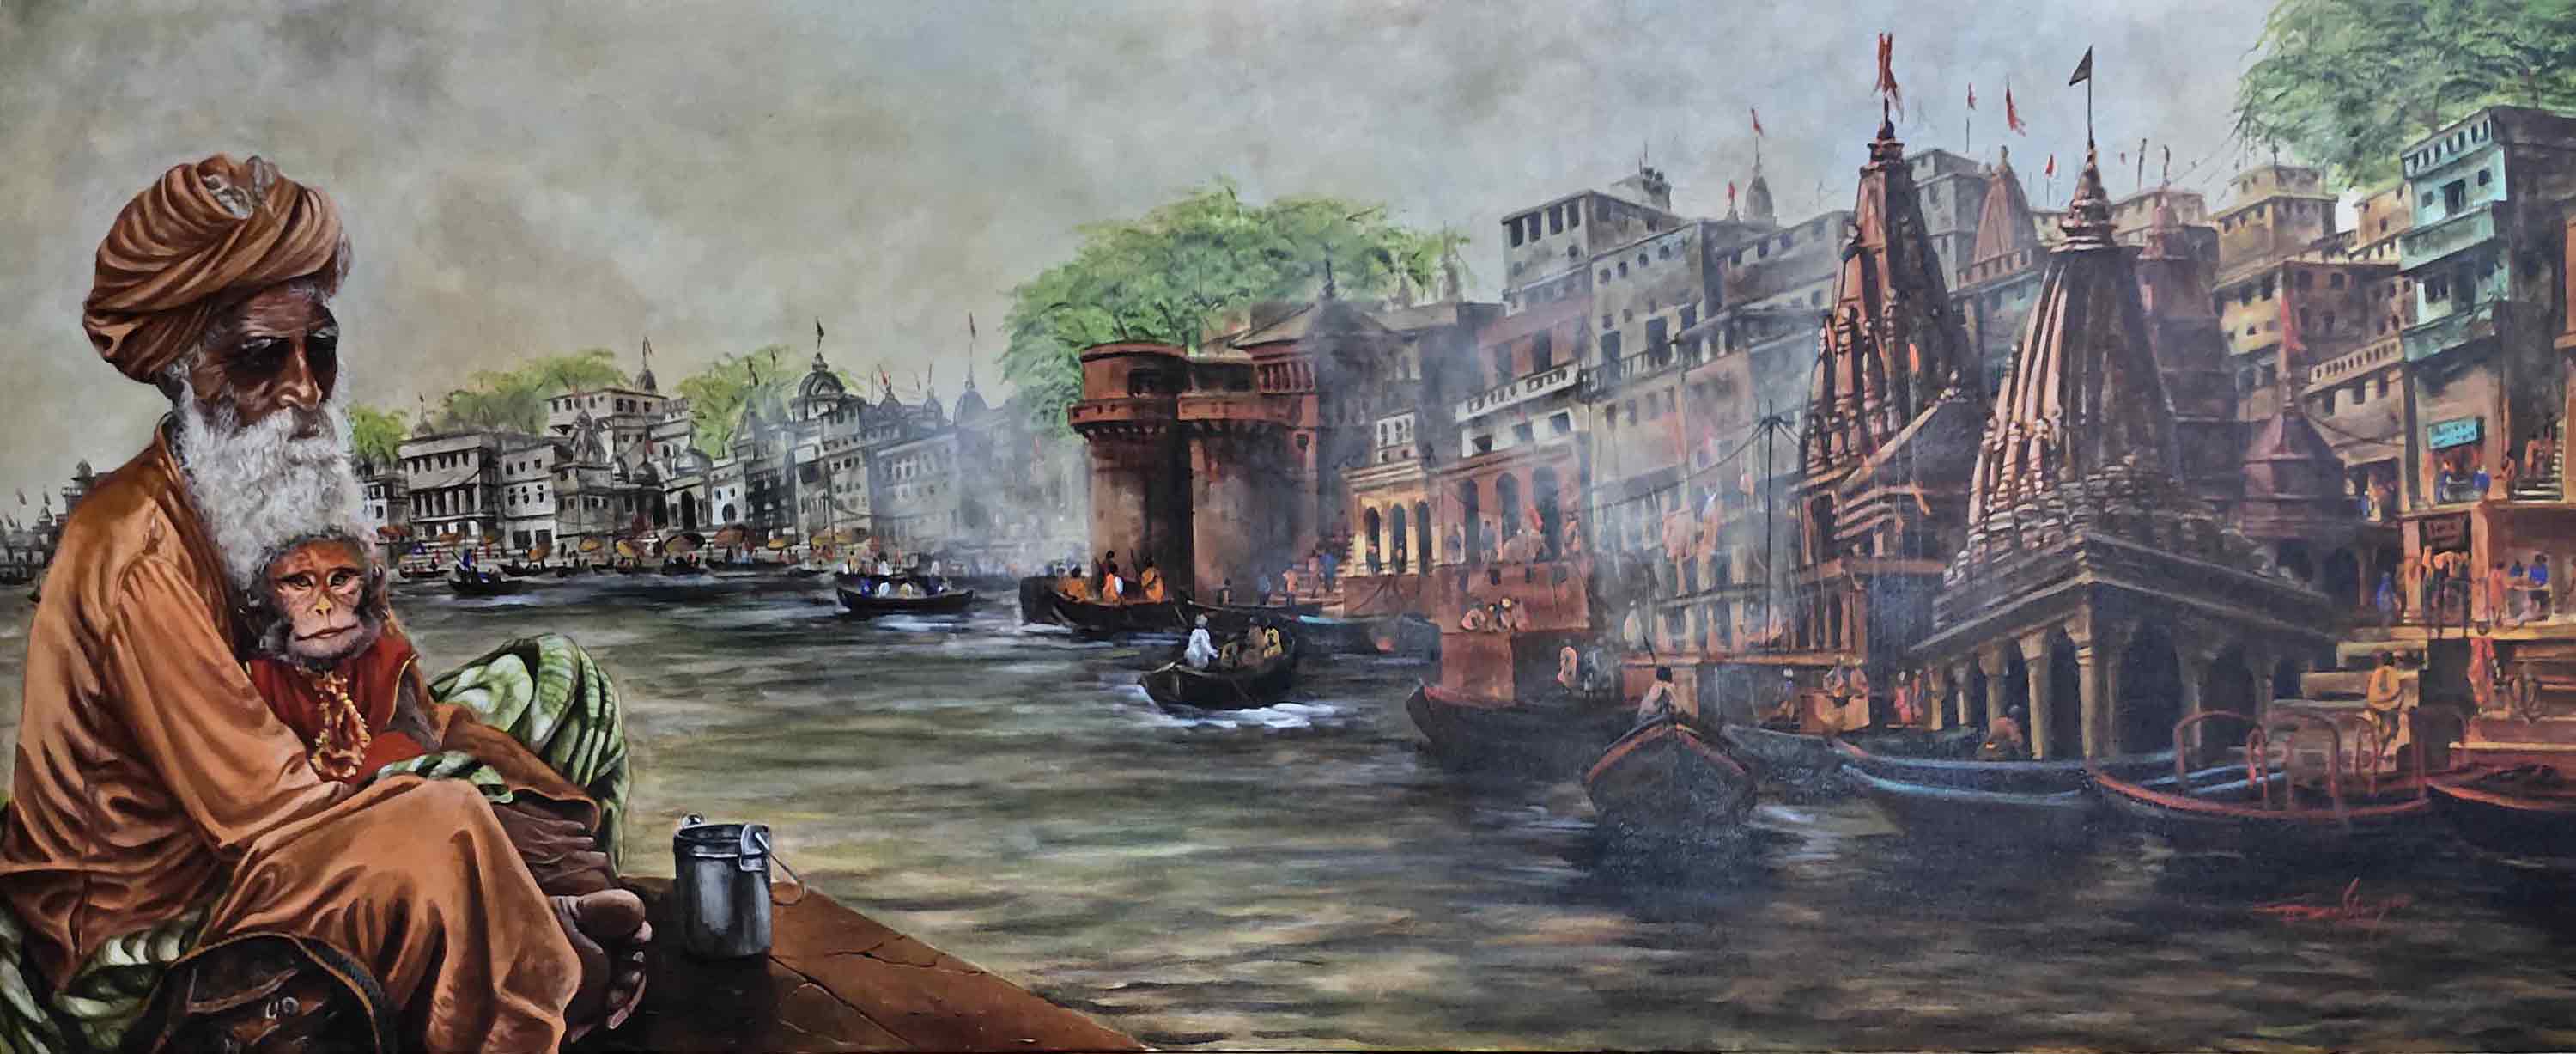 Realism Painting with Acrylic on Paper "Varanasi Ghat and Sadhu" art by Ghanshyam Kashyap